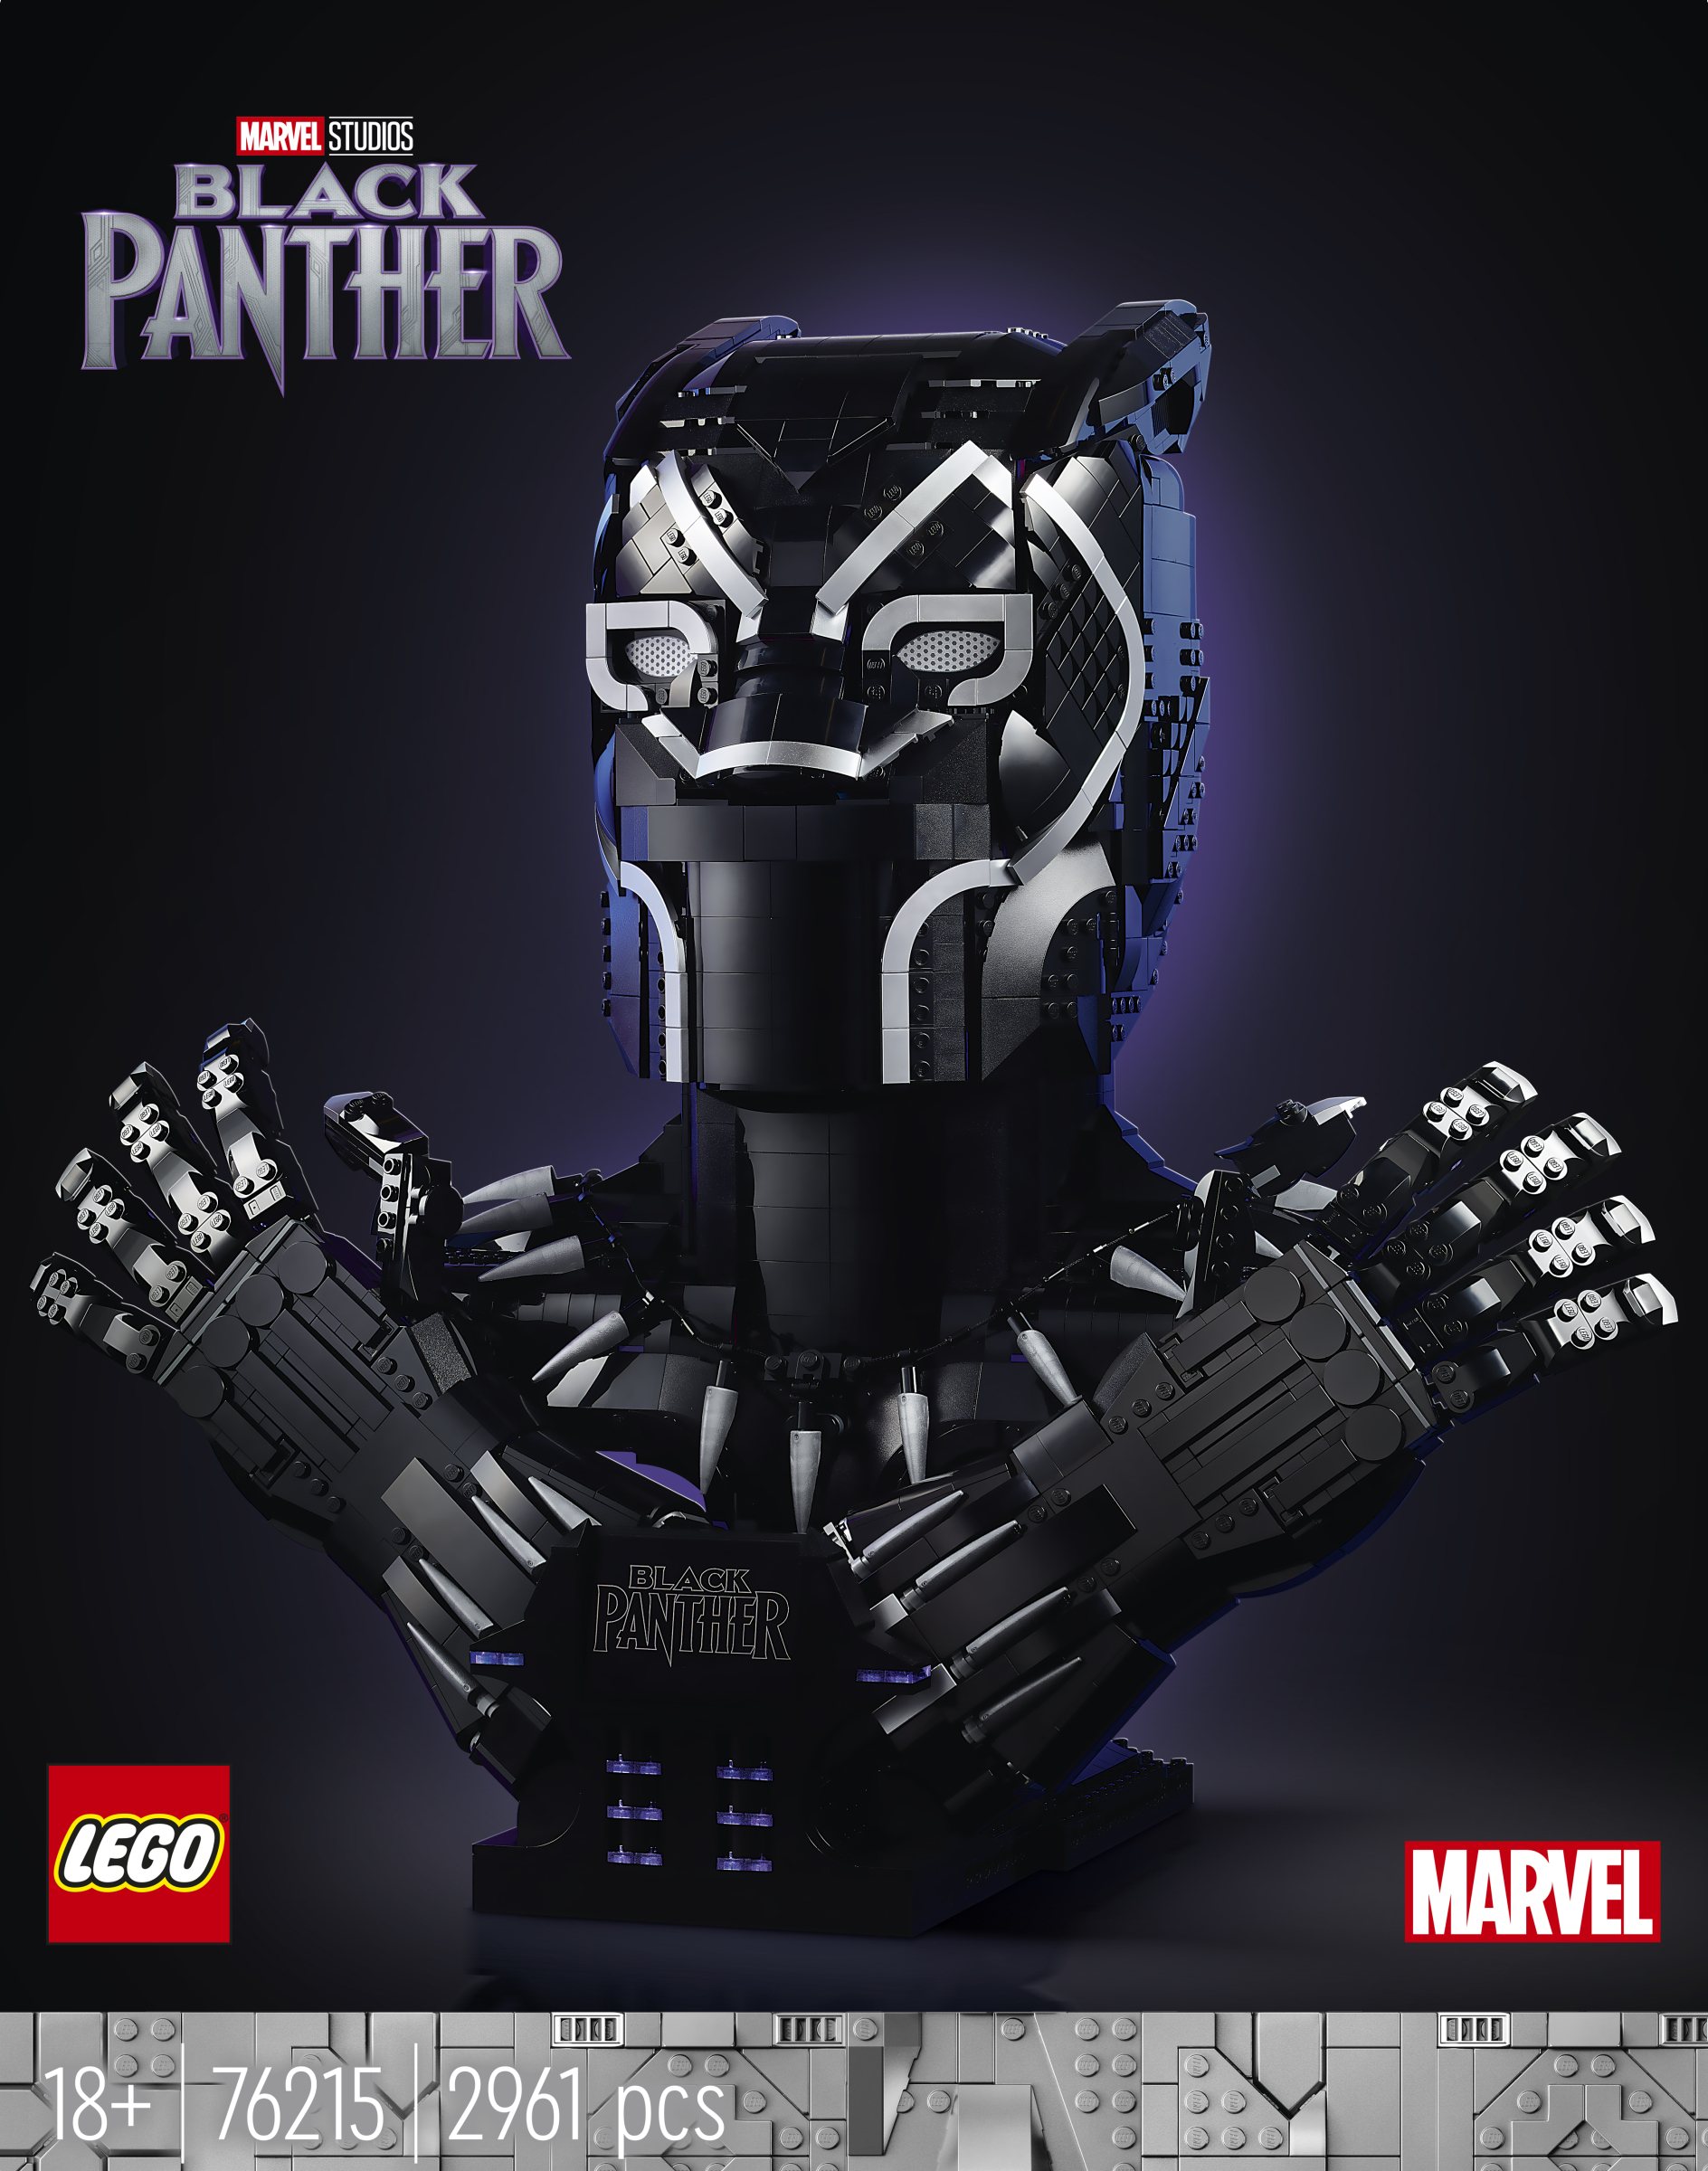 LEGO 76215 Black Panther review